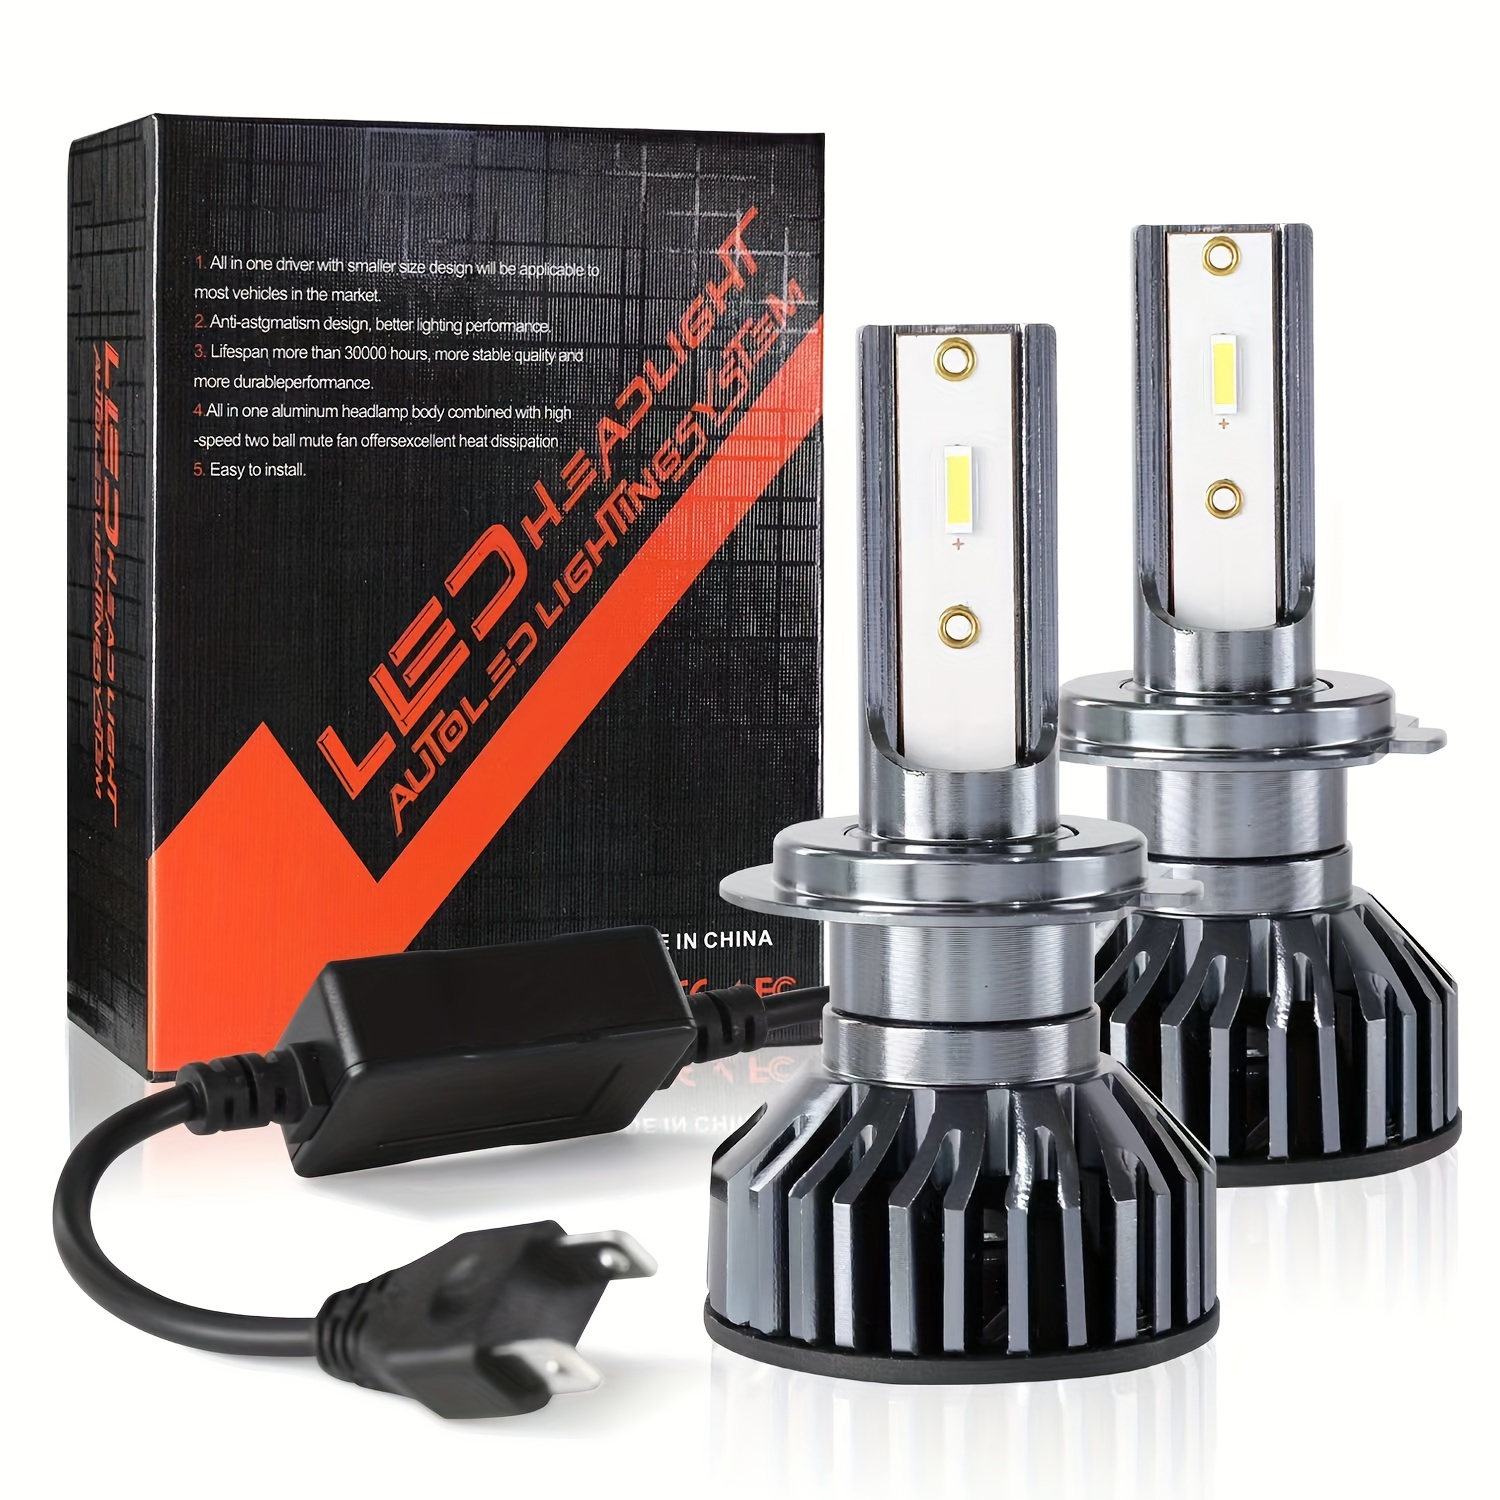 China BULBTEK W1-1860 Car Led Bulbs Auto Led Fog Light H1 H3 H4 H7 9005  9006 In Auto Led Lighting System Manufacture and Factory